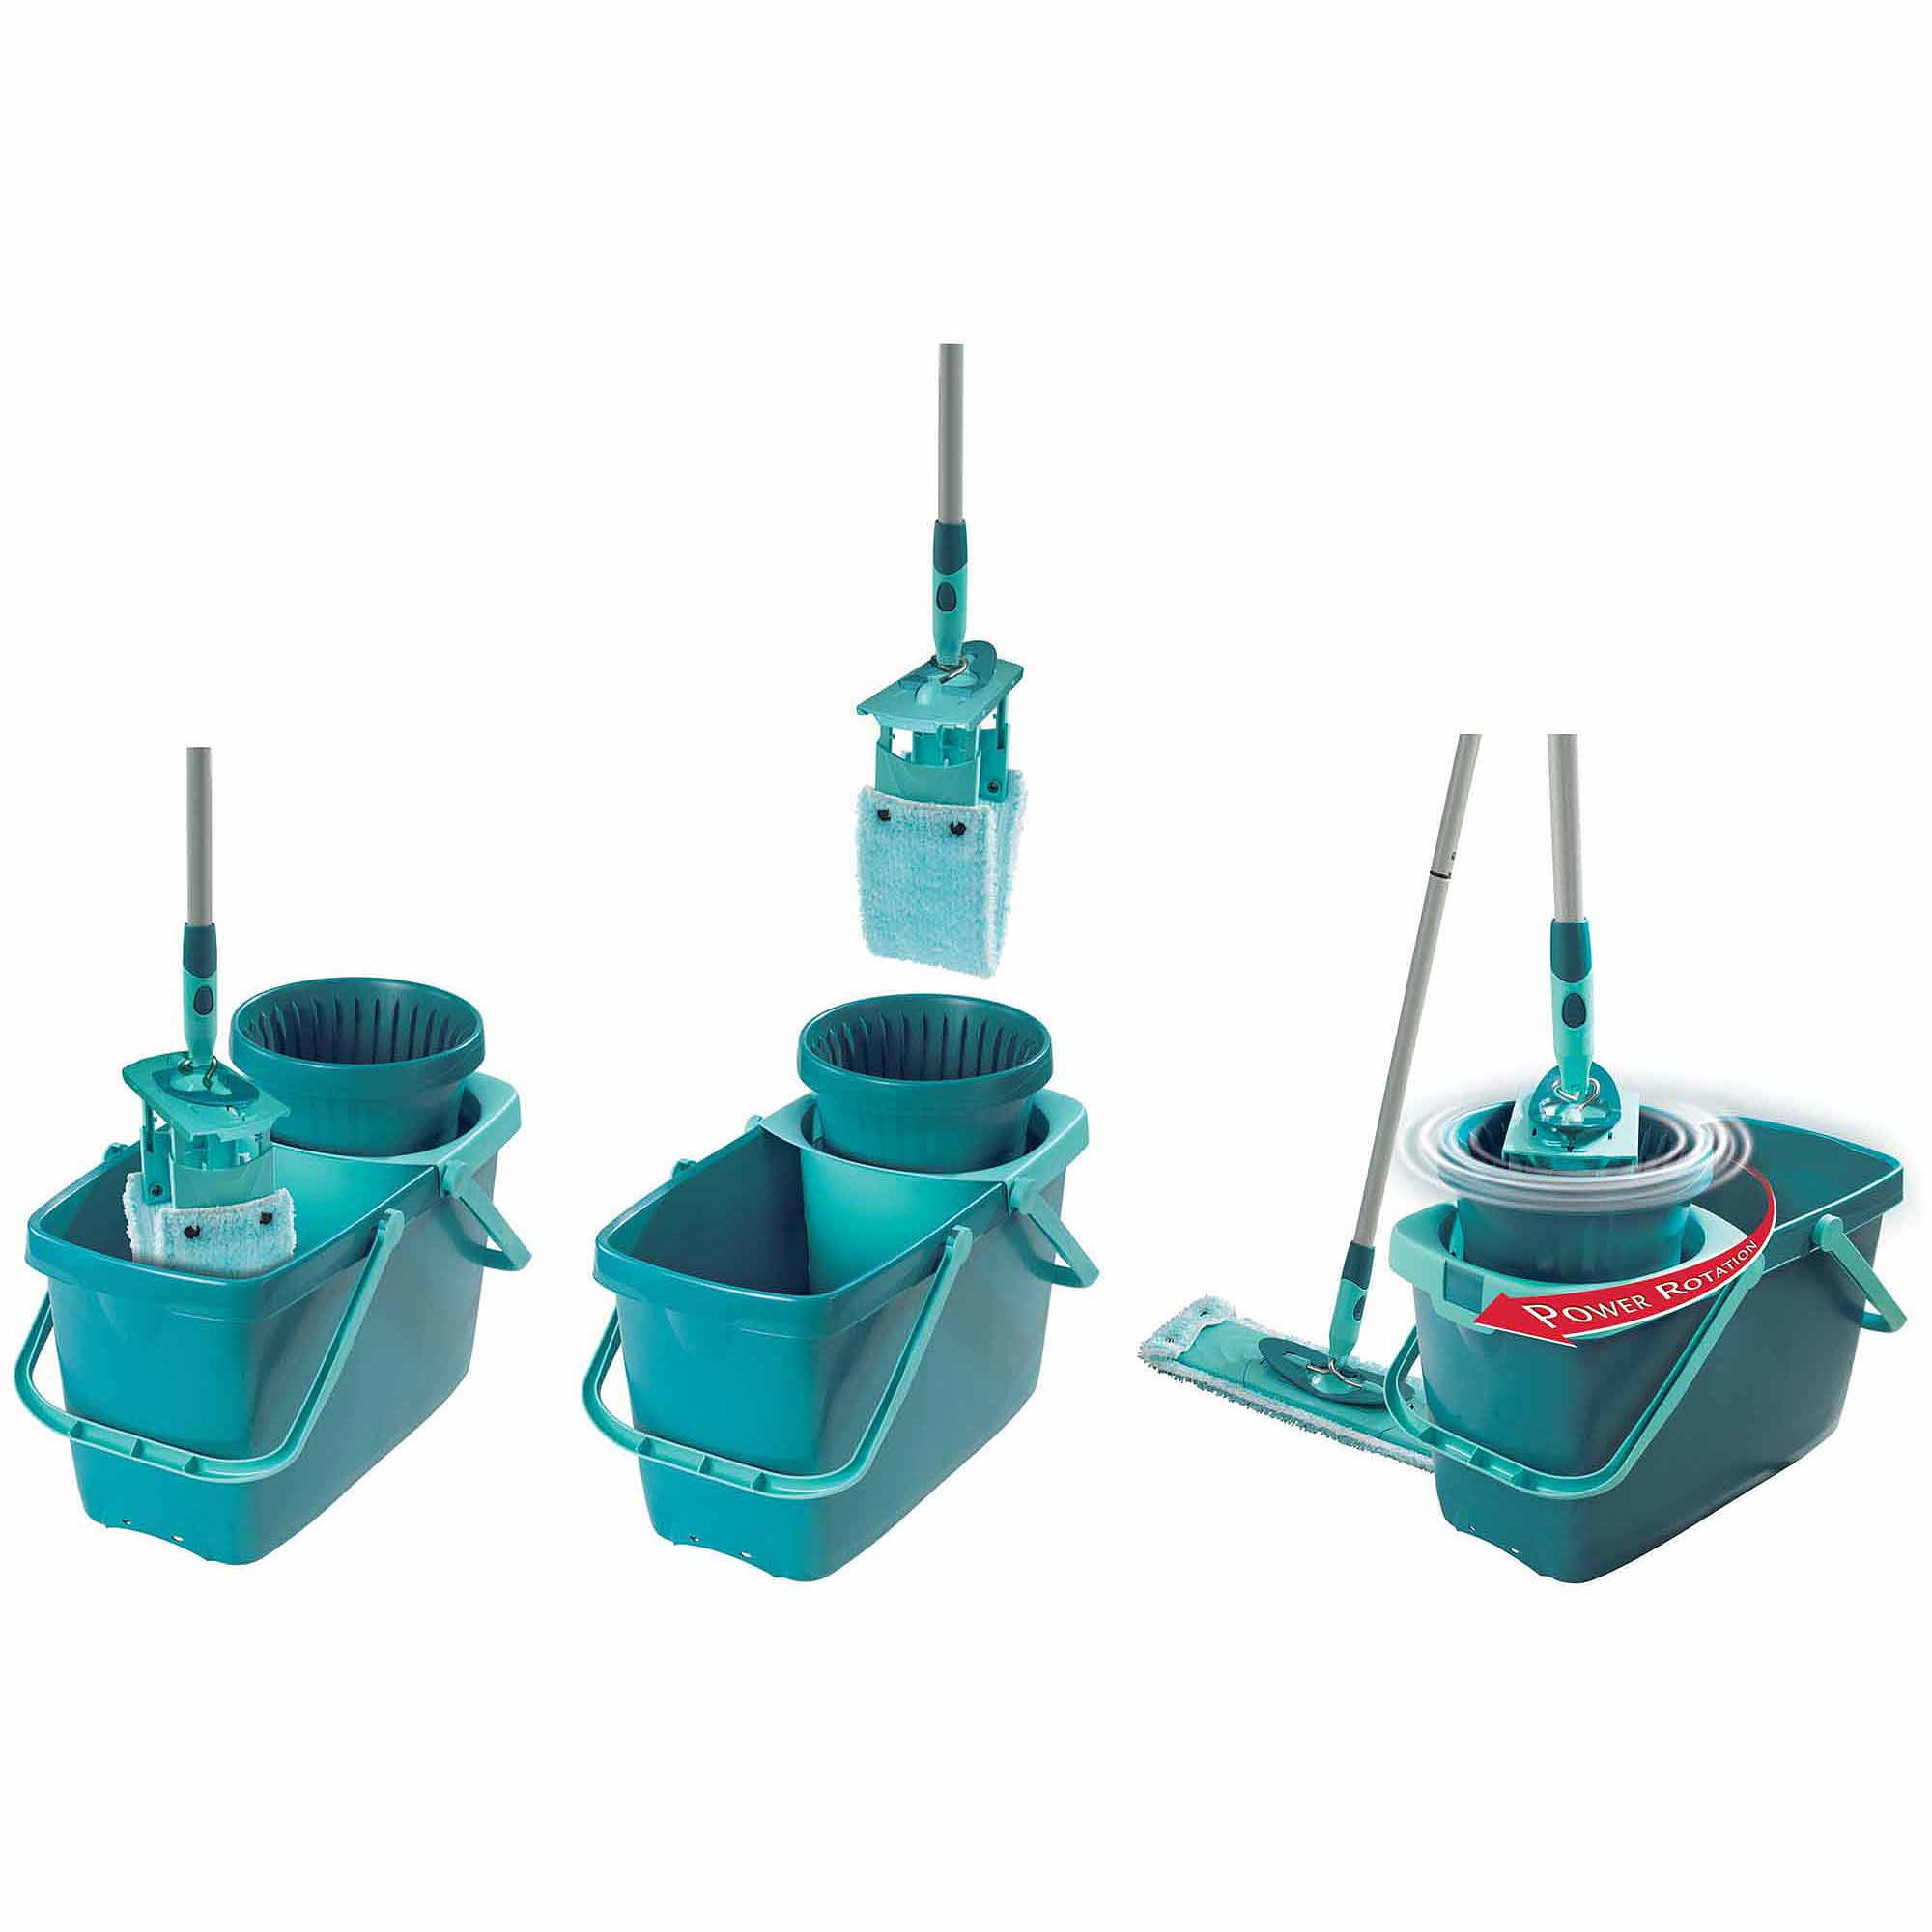 Spin Rectangle Mop/Sweeper XL Set Bucket, and Clean with Twist Leifheit Mop Turquoise